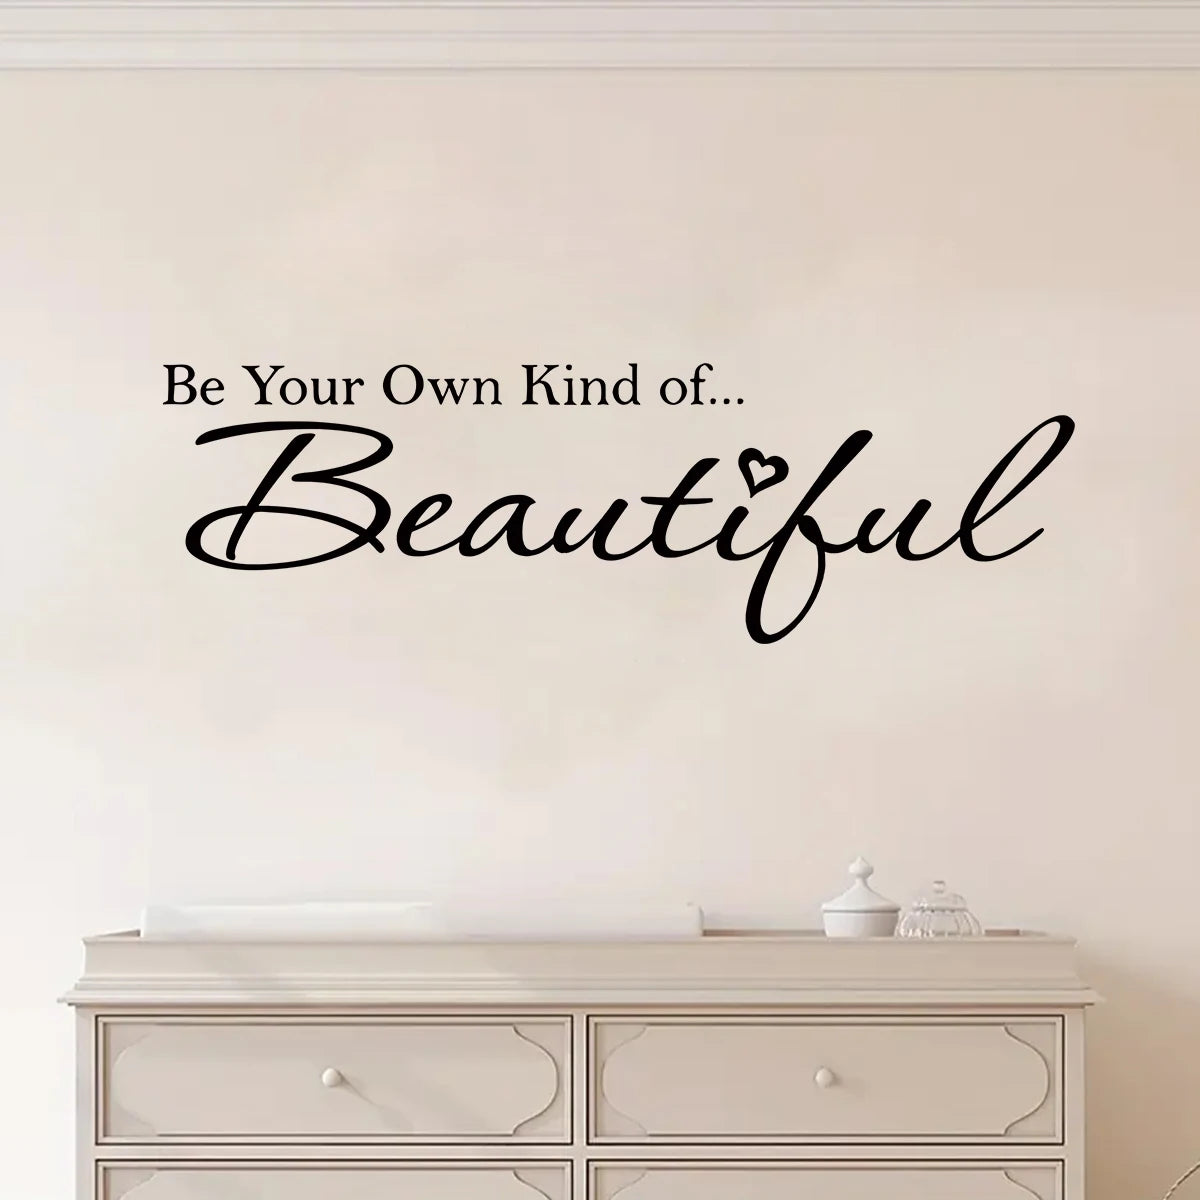 Beautiful Inspirational Quote Wall Sticker Removable Peel and Stick Word Art Wall Decal For Living Room Bedroom Creative DIY Home Decor